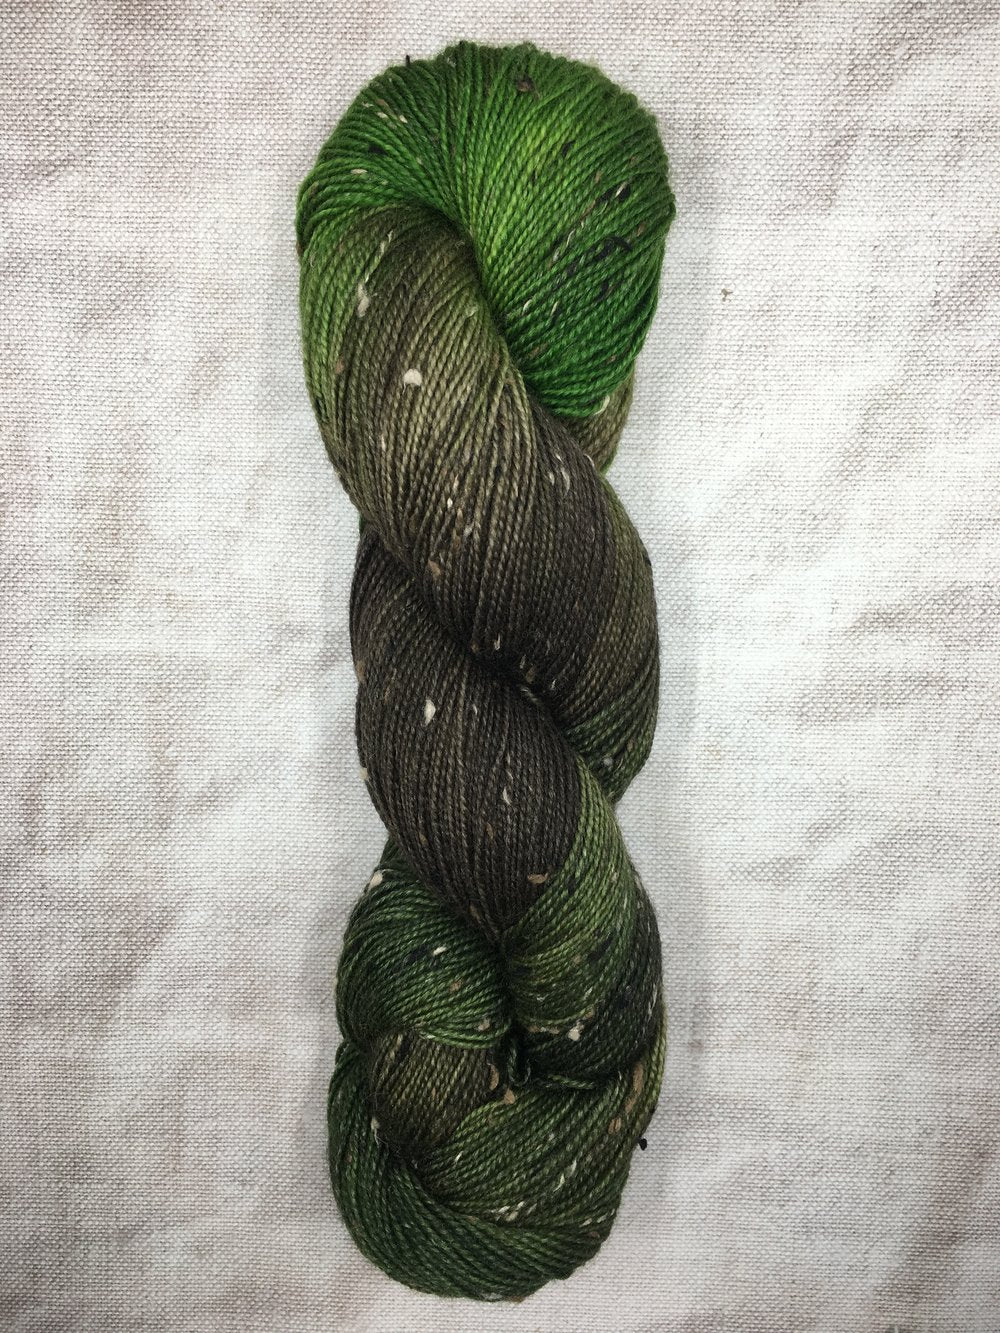 HAND DYED YARN Donegal tweed wool indie dyed yarn | The Forest Floor | Available in yarn weights 4ply/fingering/sock, DK & Aran | Superwash | International shipping from our online yarn store based in Donegal, Ireland | Suitable for knitting, crochet & weaving | Natural fibers |